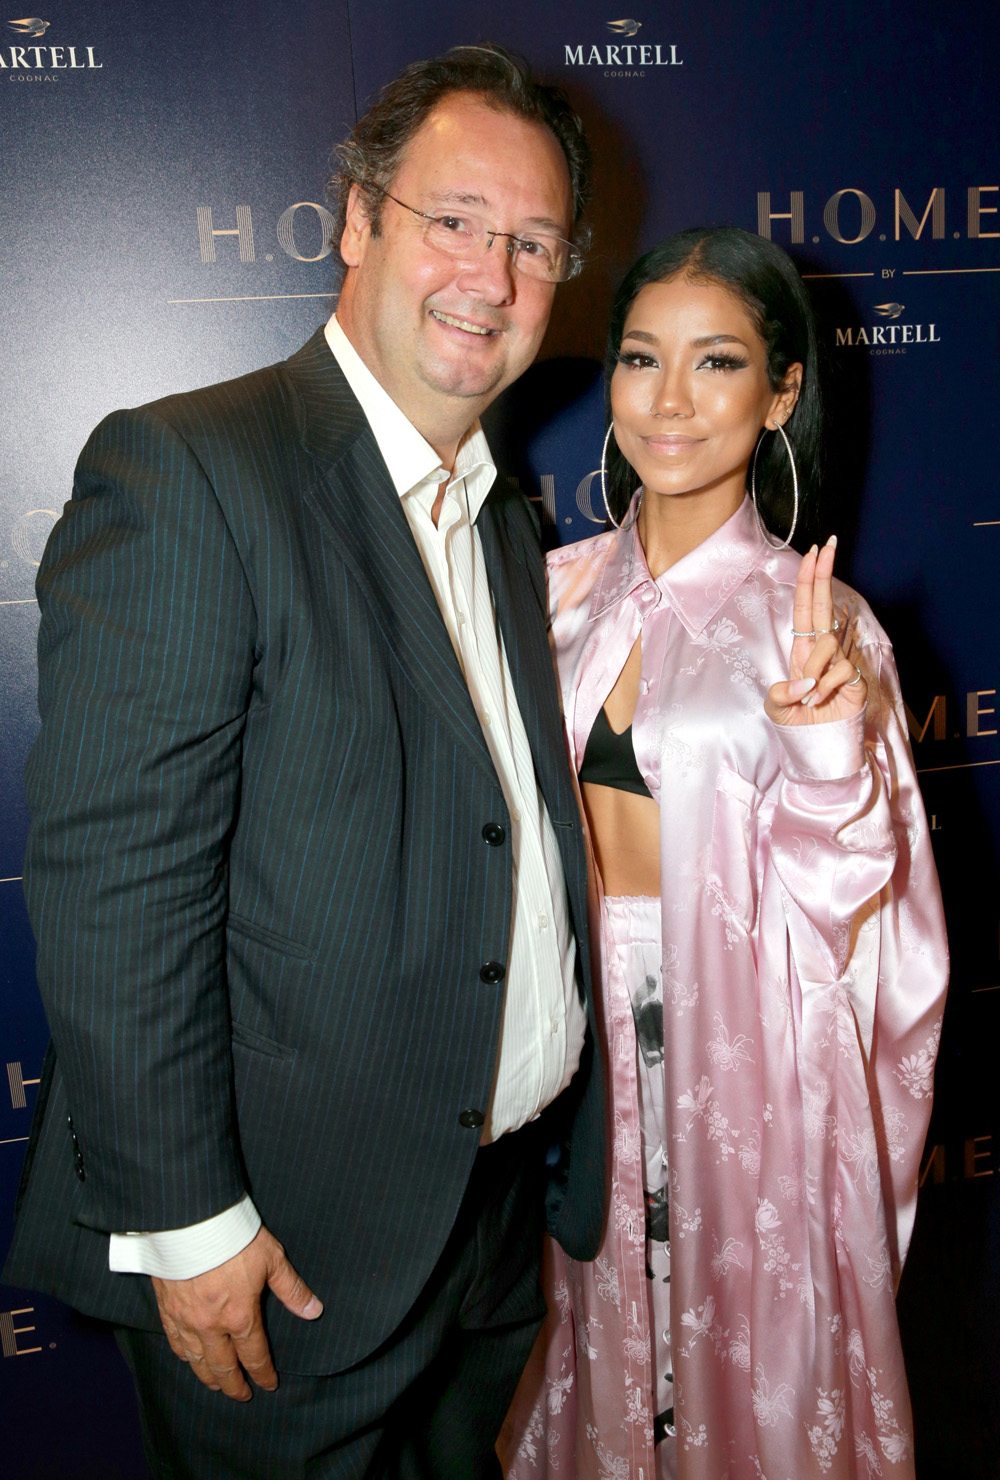 LOS ANGELES, CA - SEPTEMBER 28: Martell Mumm Perrier-Jouet CEO Cesar Giron and Jhené Aiko at H.O.M.E. by Martell hosted by Jhene Aiko on September 28, 2017 in Los Angeles, California. (Photo by Rich Fury/Getty Images for Martell)